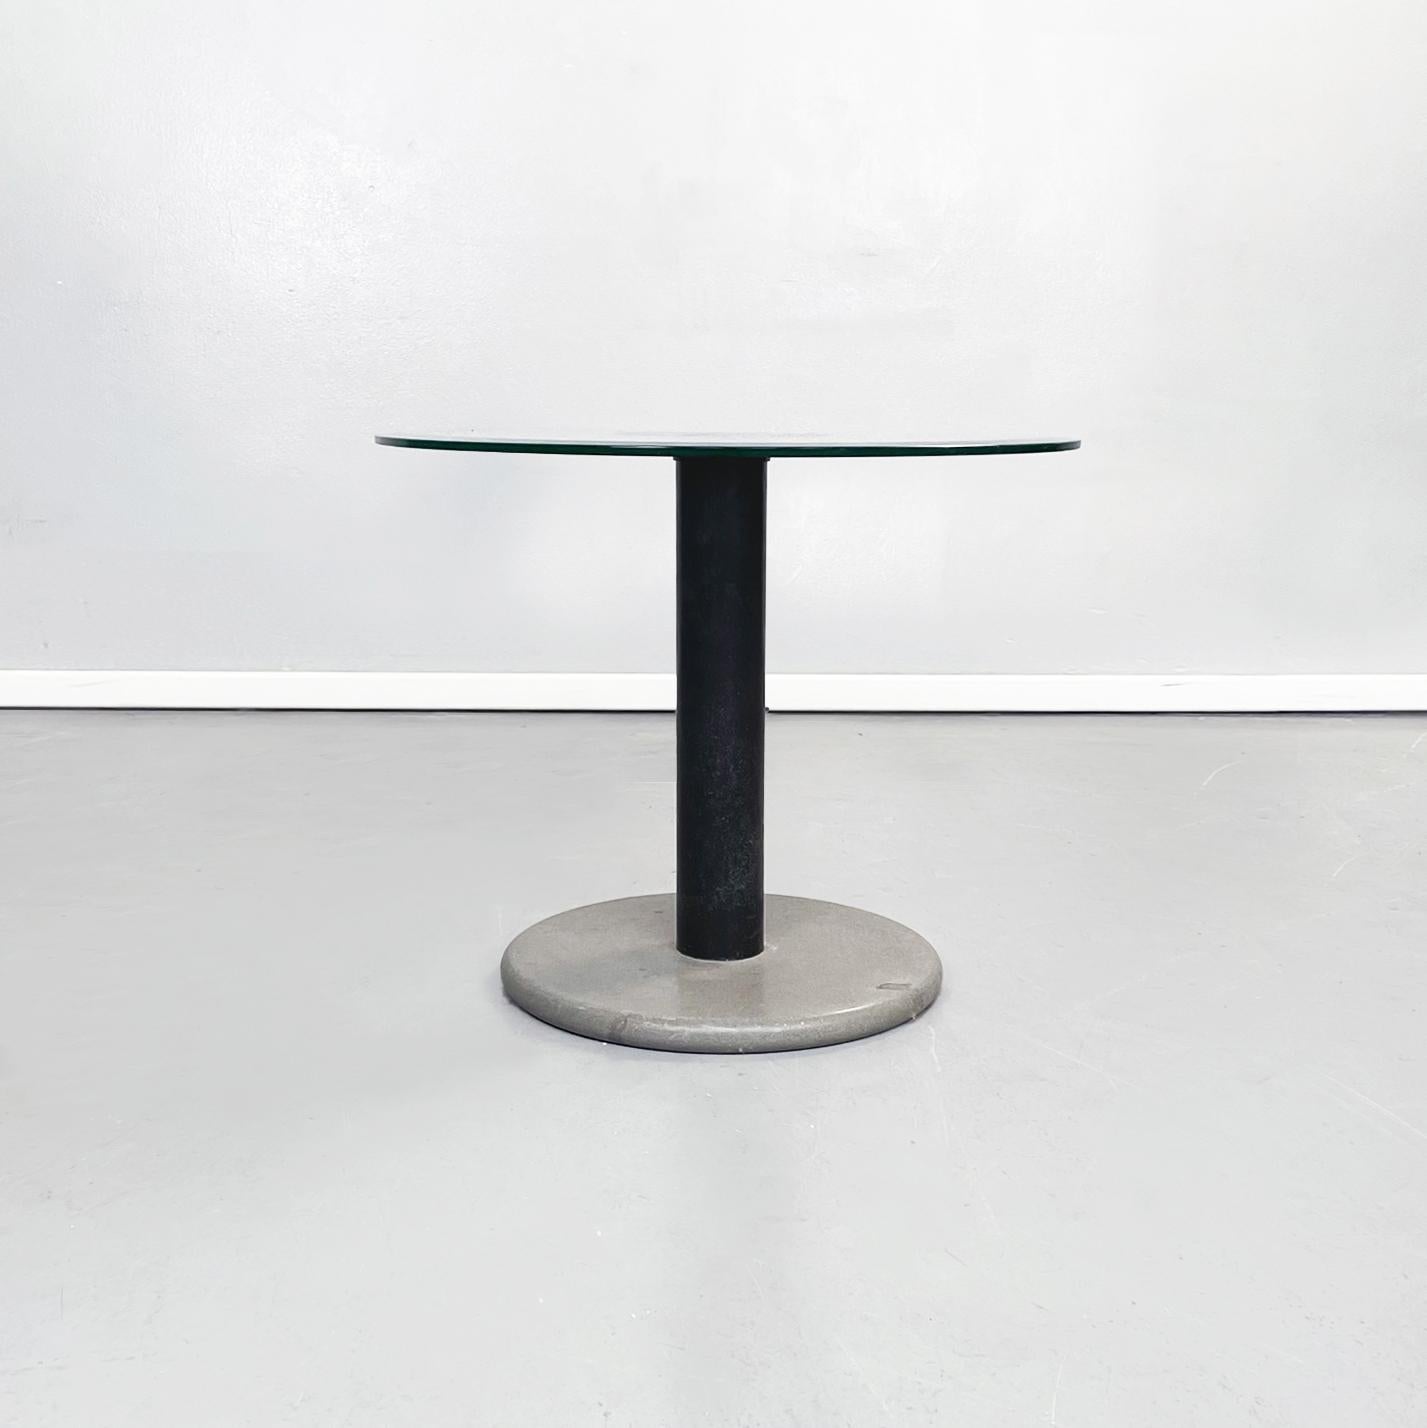 Italian modern Coffee table in green glass, black metal and grey stone, 1980s
Coffee table with round top in glass quite trasparent and green, it dipend on the light it receve.
It have two concentric black circles in the center give to the table a